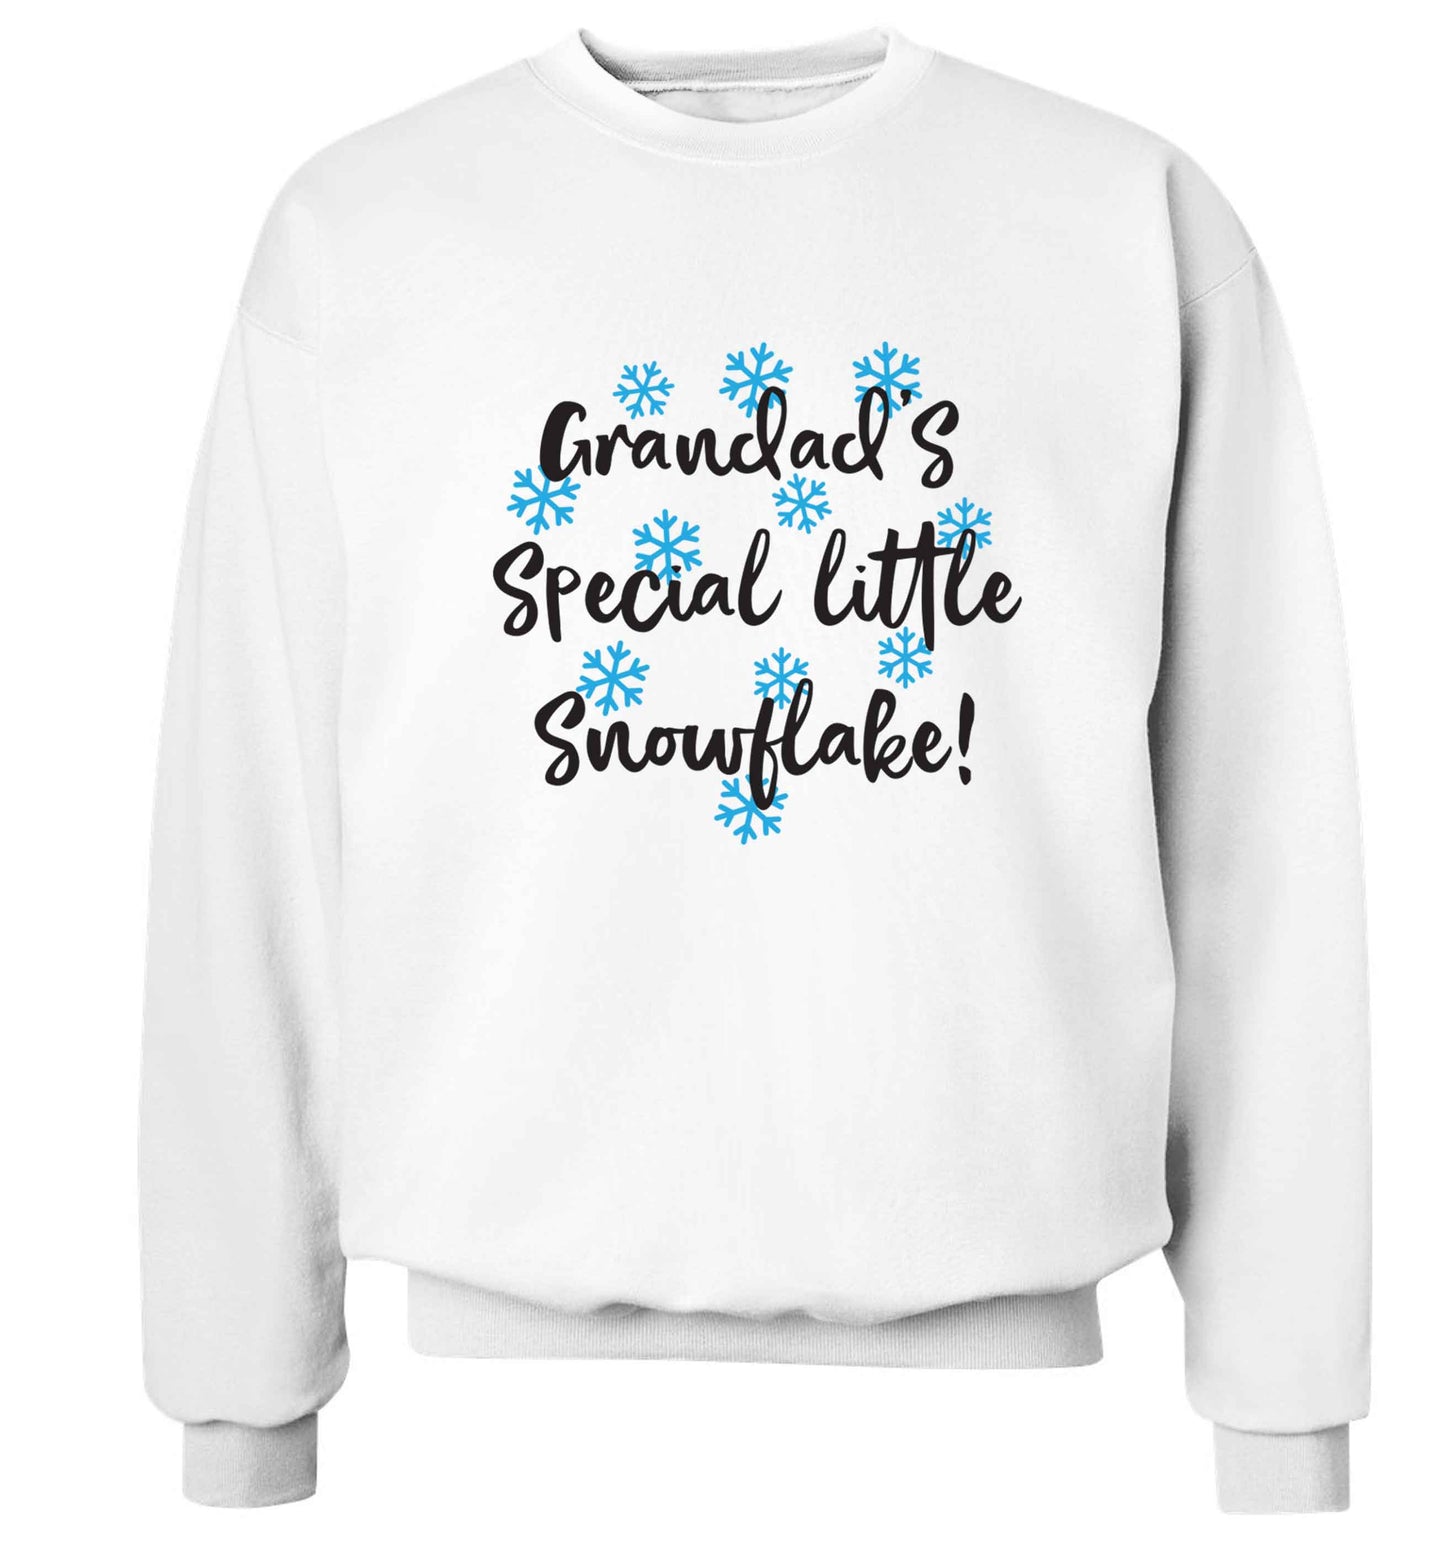 Grandad's special little snowflake Adult's unisex white Sweater 2XL